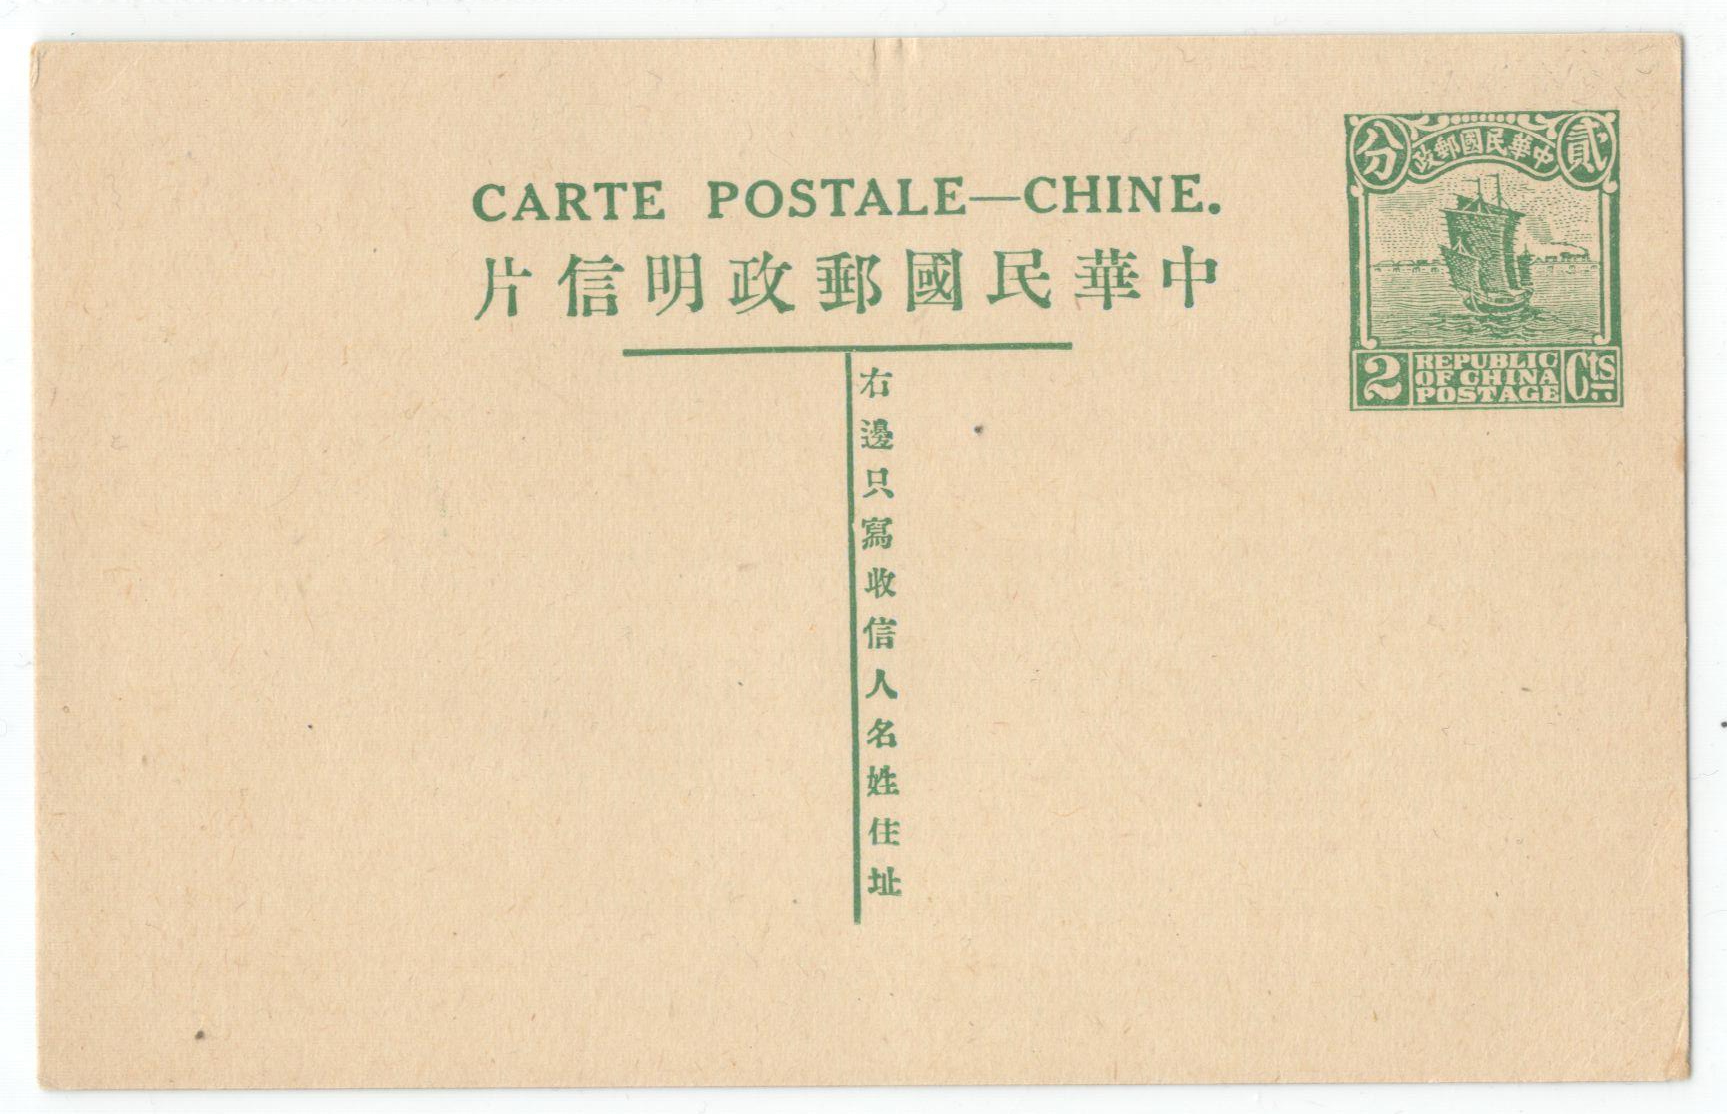 REPUBLIC OF CHINA POSTAGE - TWO CENTS POSTAL STATIONERY CARD